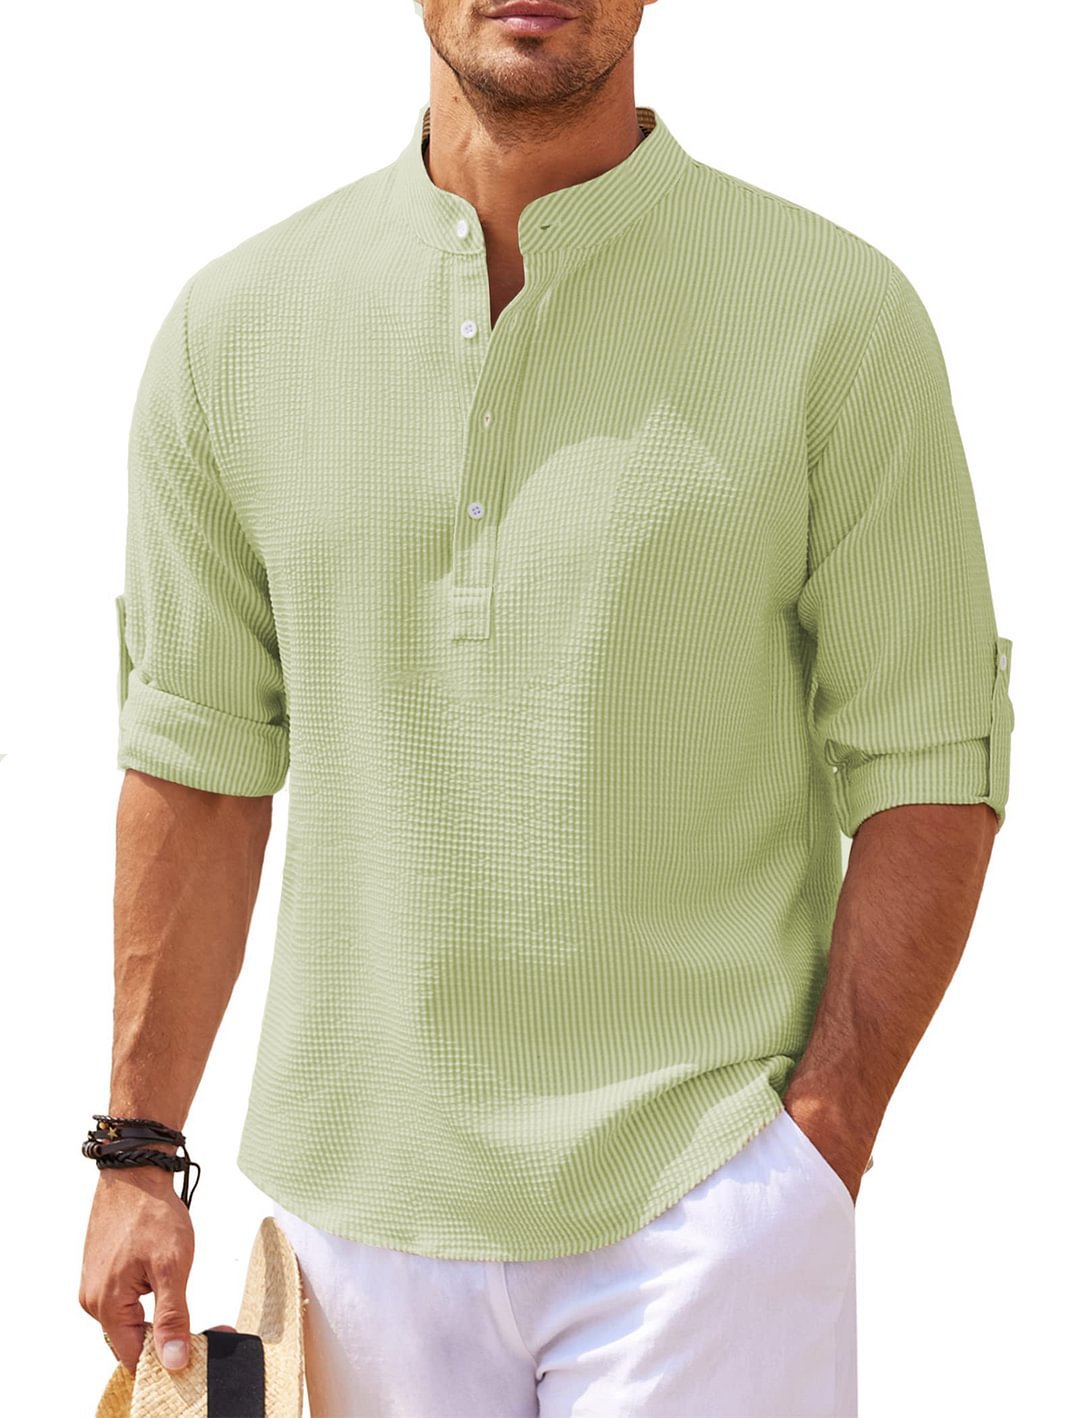 Men's Long Sleeve Stand Collar Solid Color Shirt GlamzLife